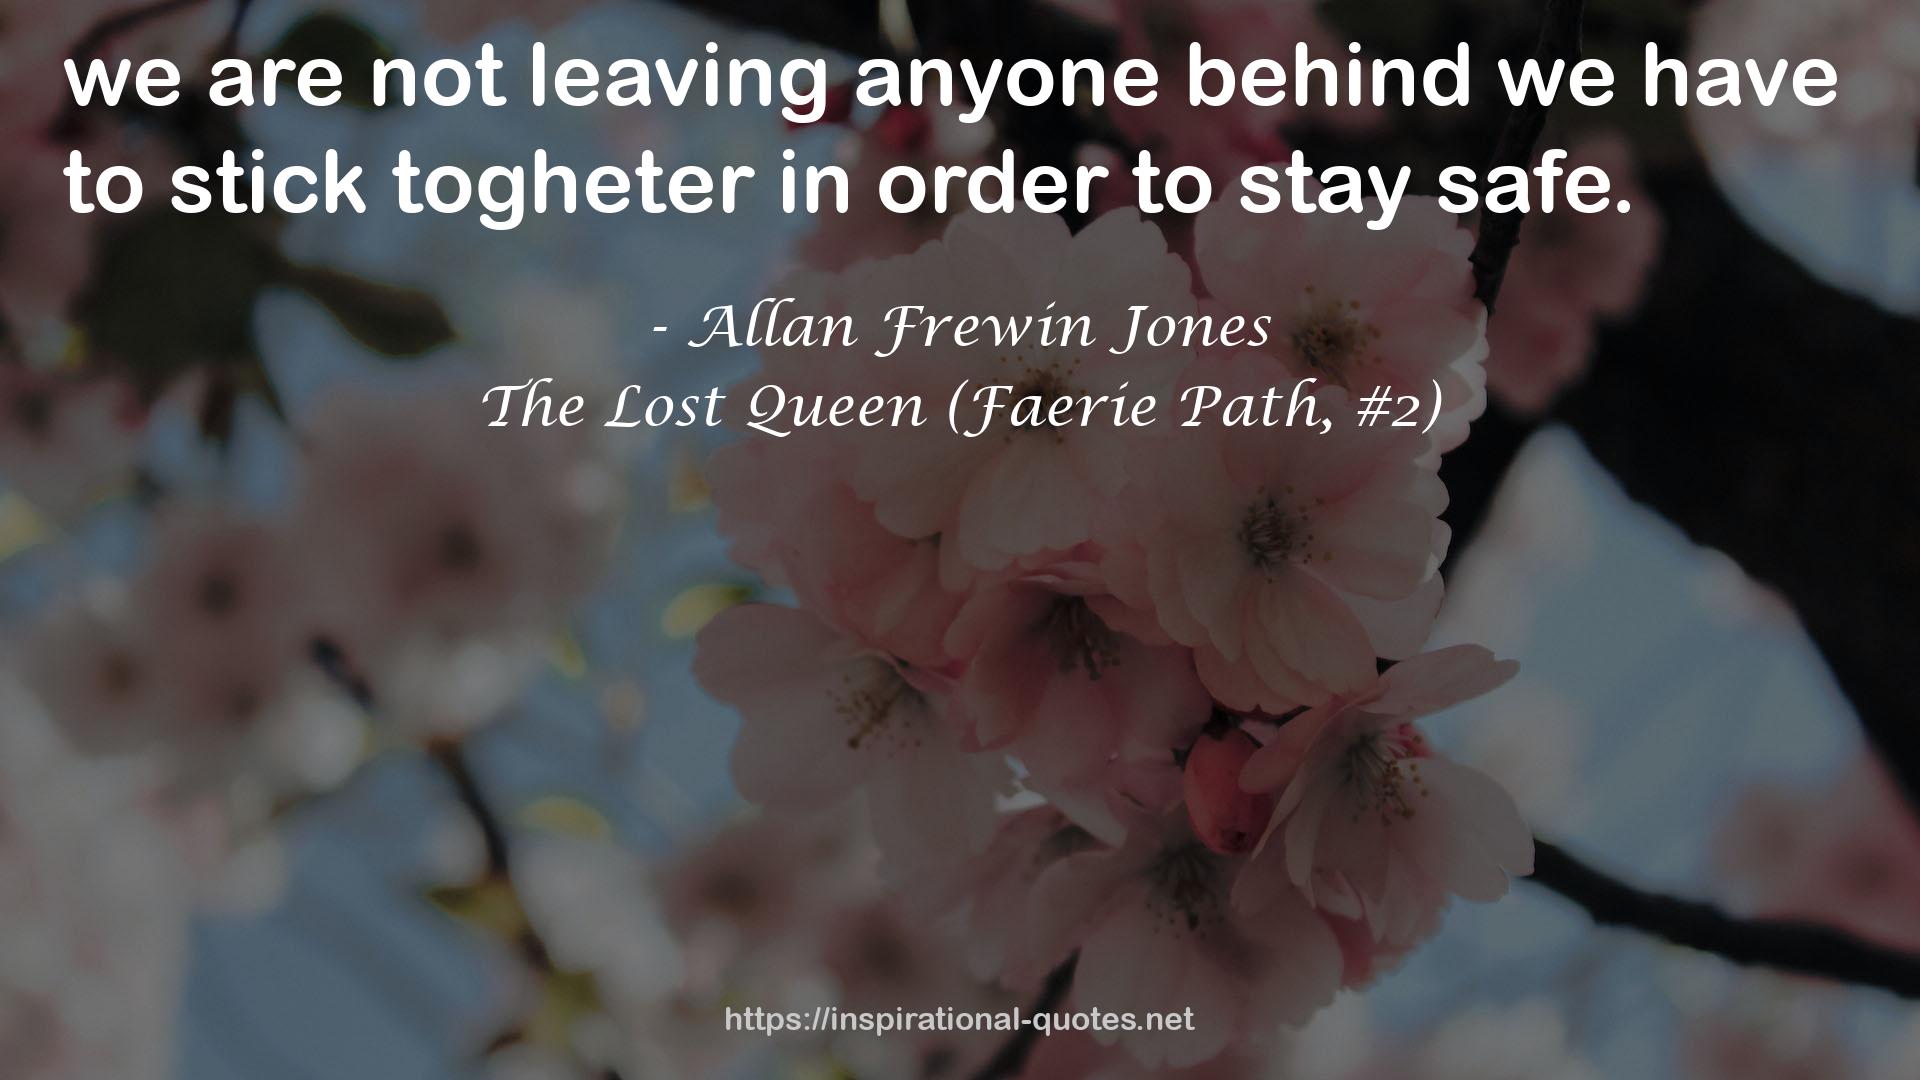 The Lost Queen (Faerie Path, #2) QUOTES